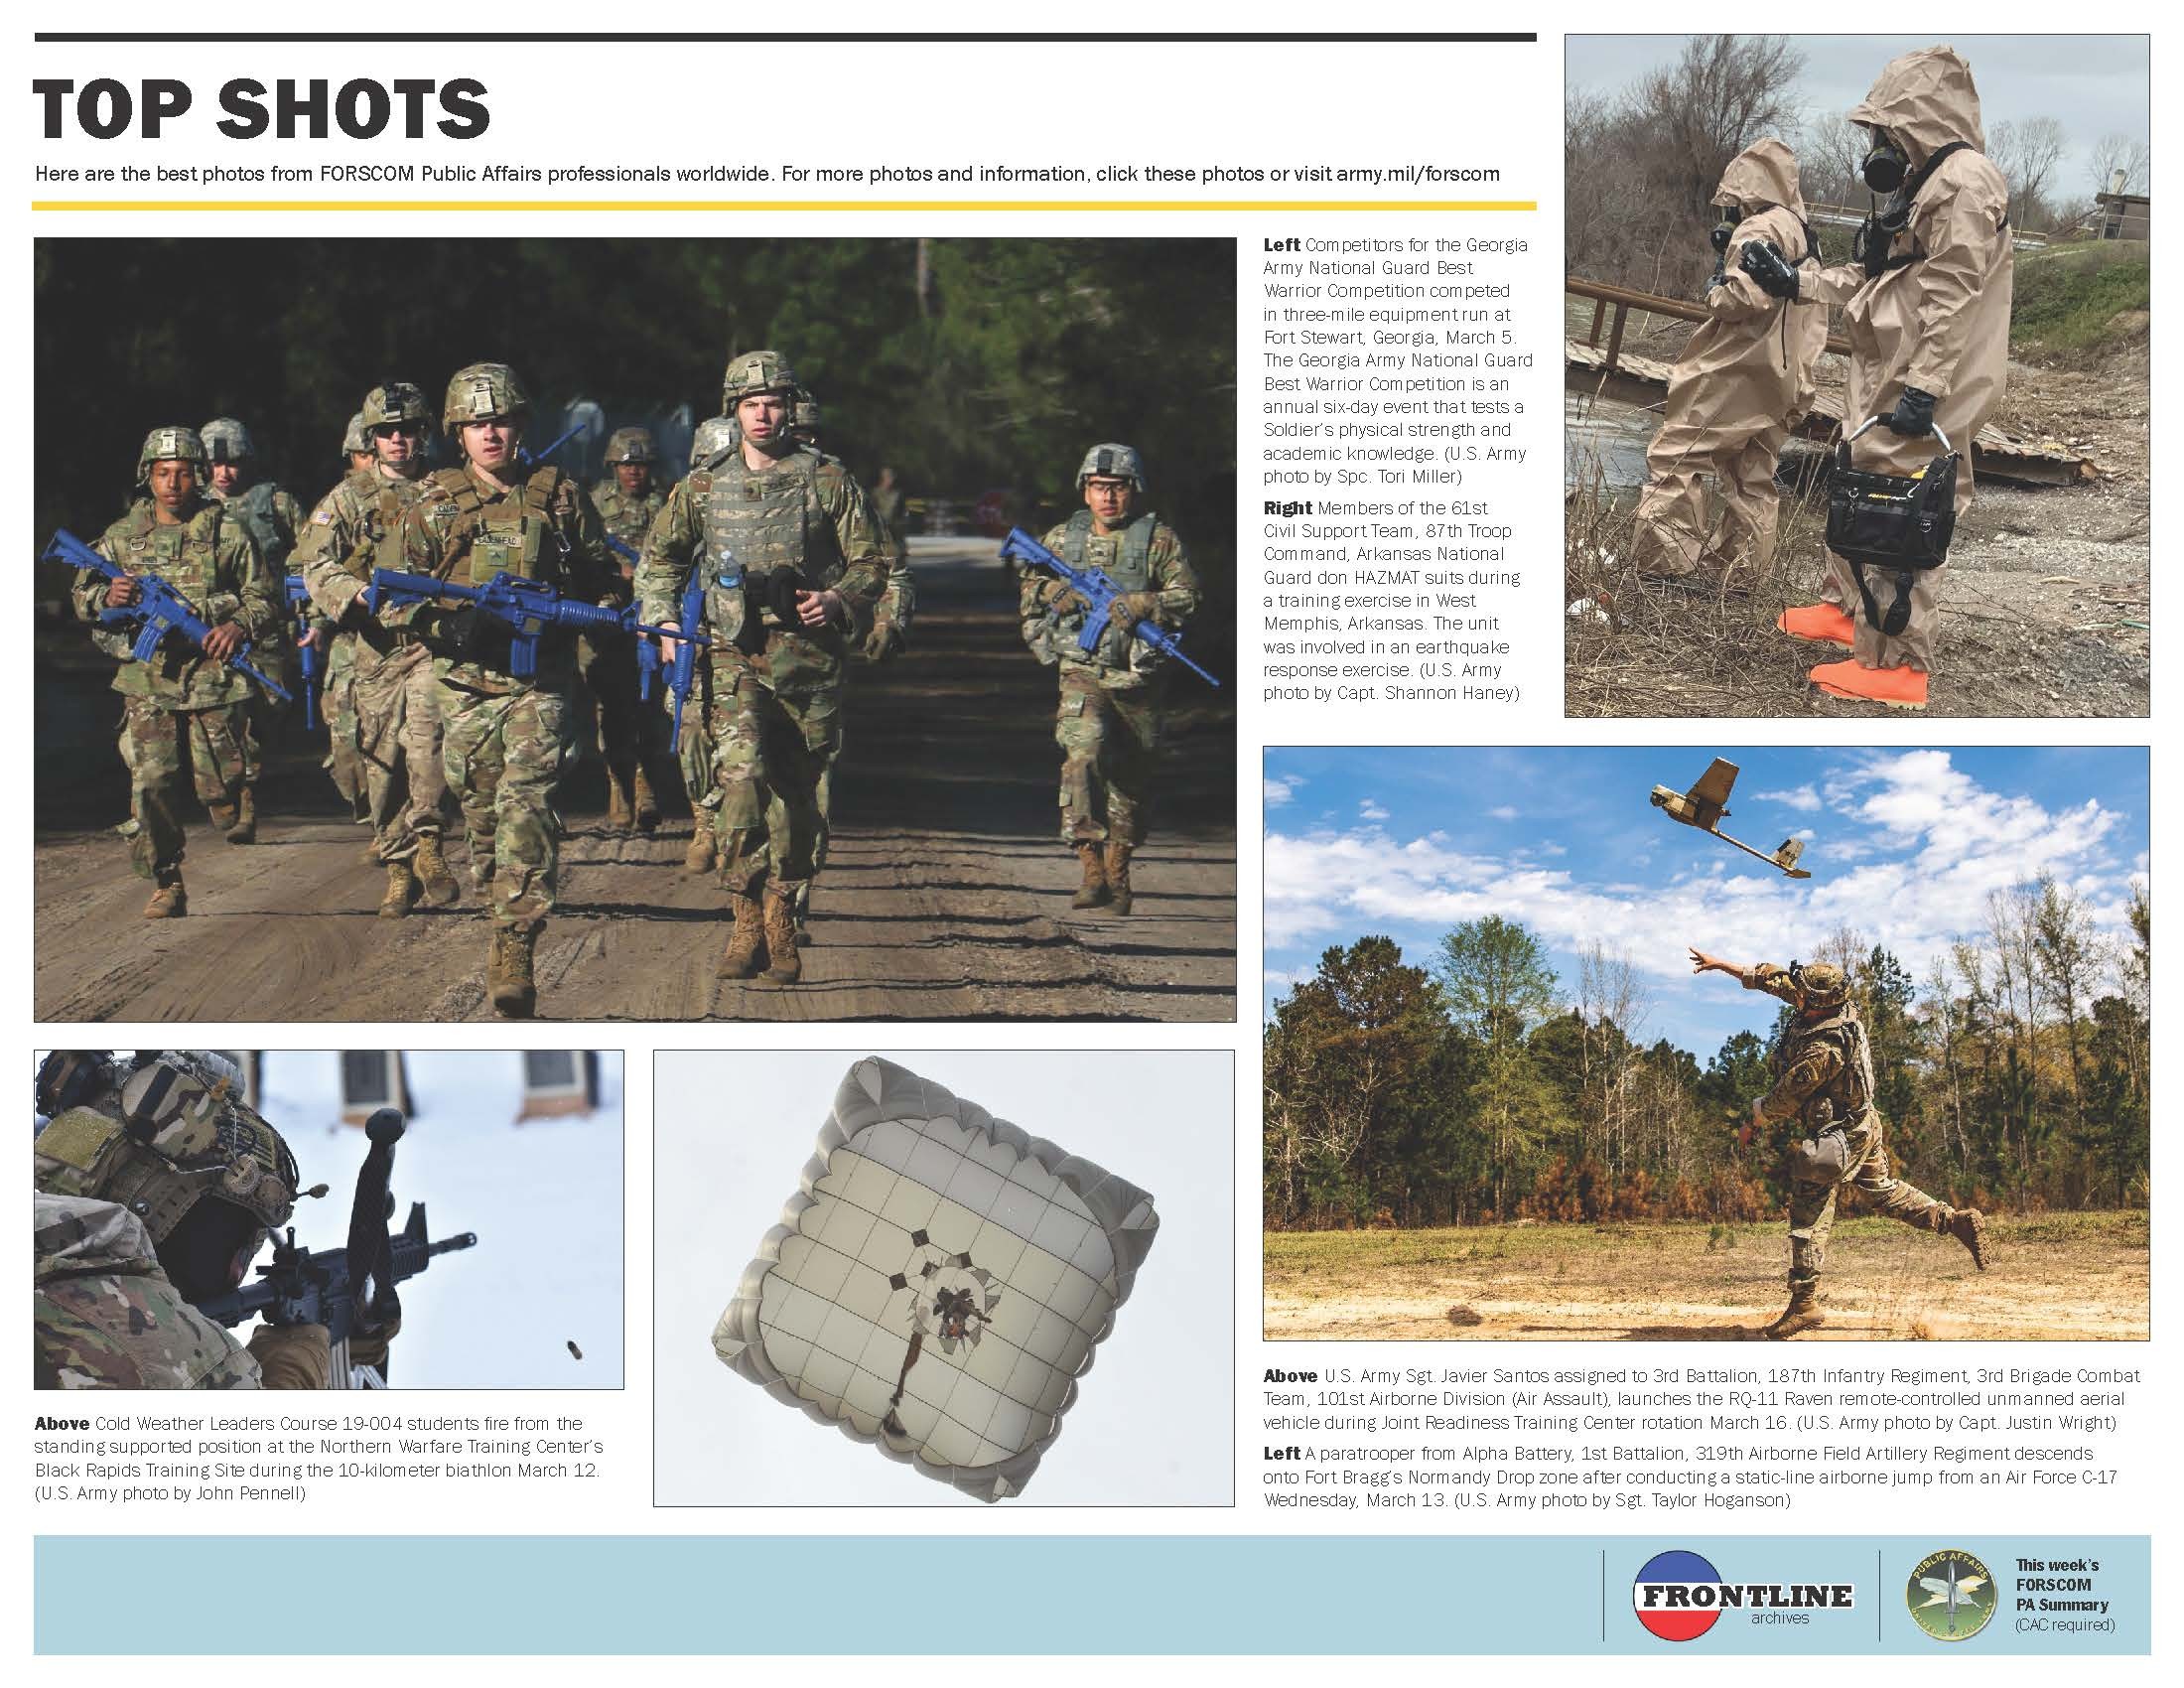 FORSCOM Frontline - March 22, 2019 | Article | The United States Army